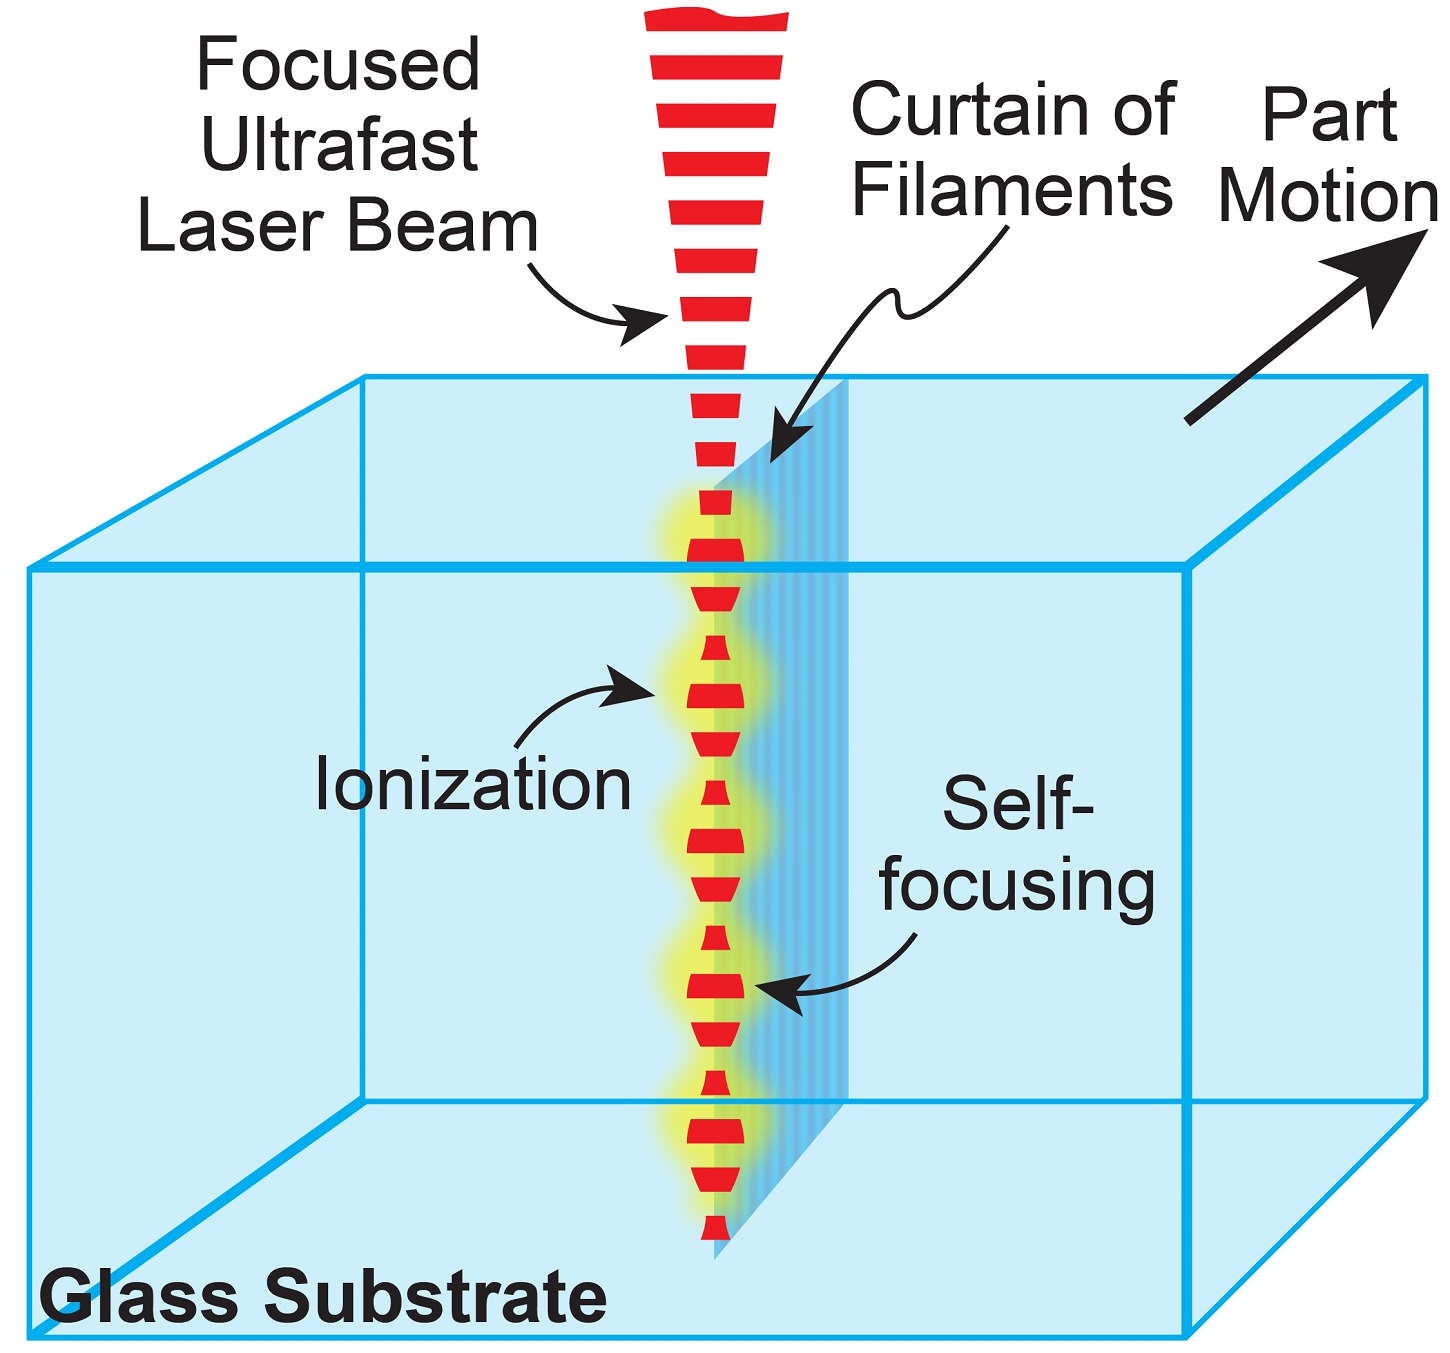 Figure 3: Schematic of the filamentation process which involves periodic self-focusing of an ultra-short pulse laser beam.